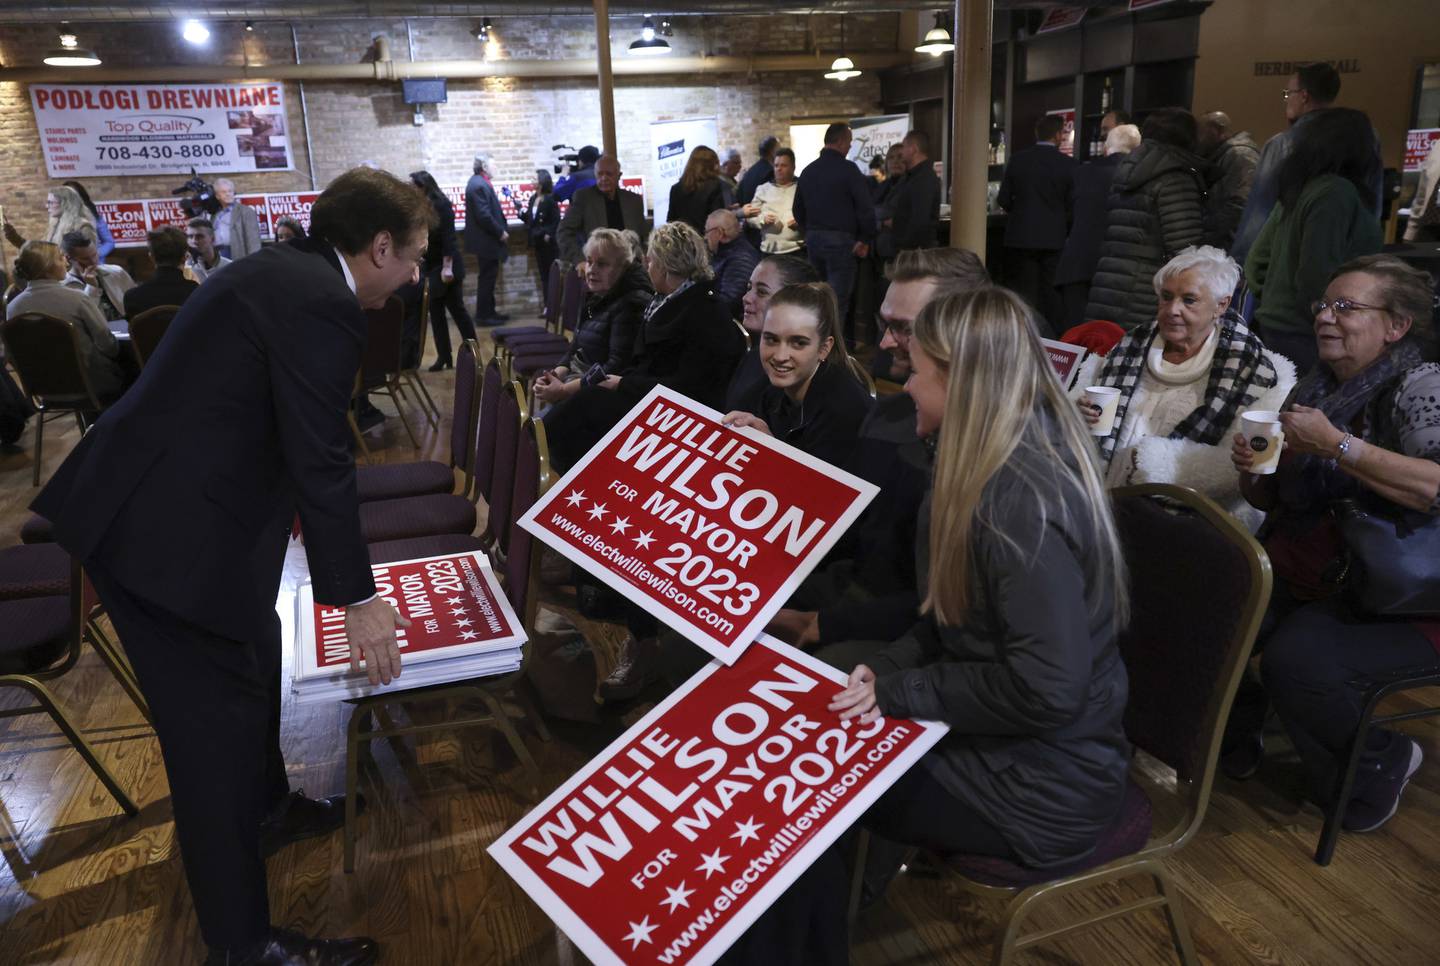 Signs are handed out prior to the arrival of Chicago mayoral candidate Willie Wilson at the Copernicus Center in Chicago’s Jefferson Park neighborhood on Nov. 15.  